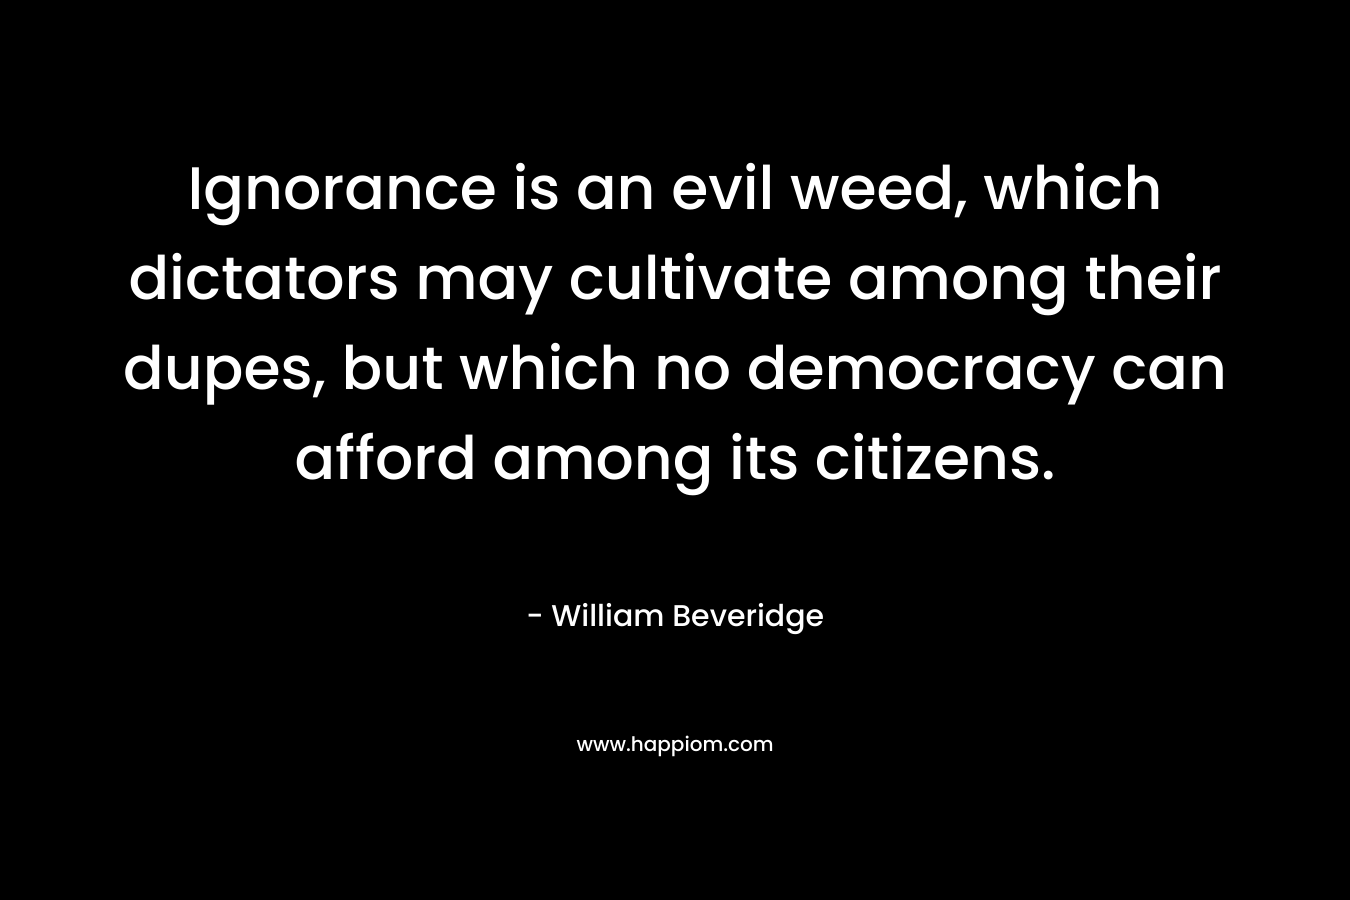 Ignorance is an evil weed, which dictators may cultivate among their dupes, but which no democracy can afford among its citizens. – William Beveridge